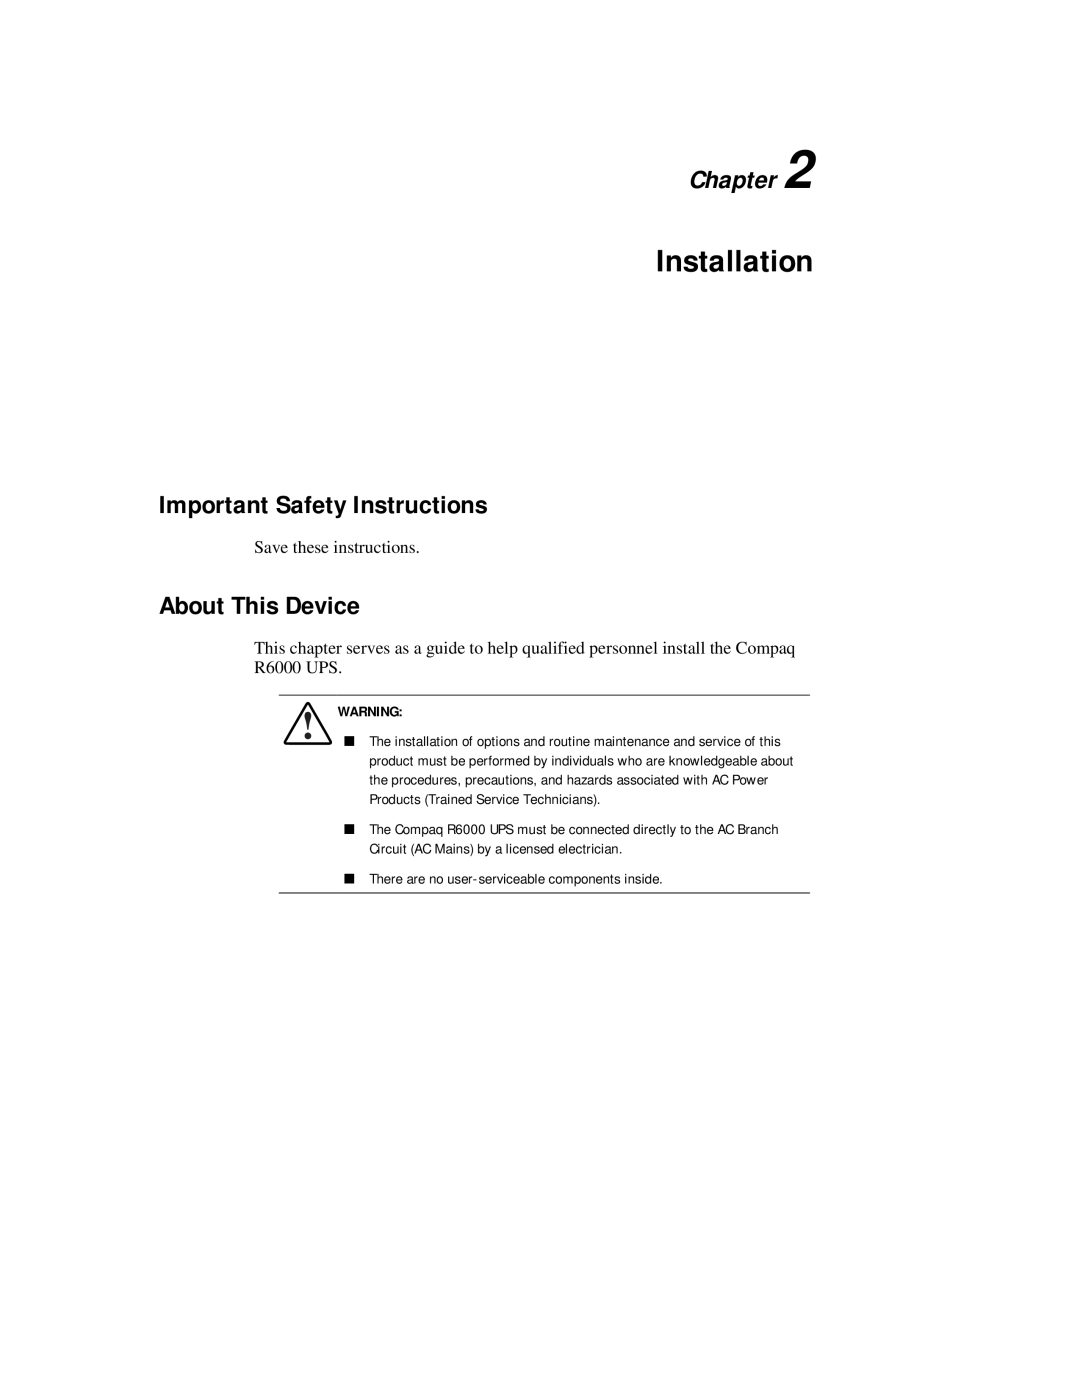 Compaq R6000 Series manual Installation, Important Safety Instructions, About This Device, Chapter 